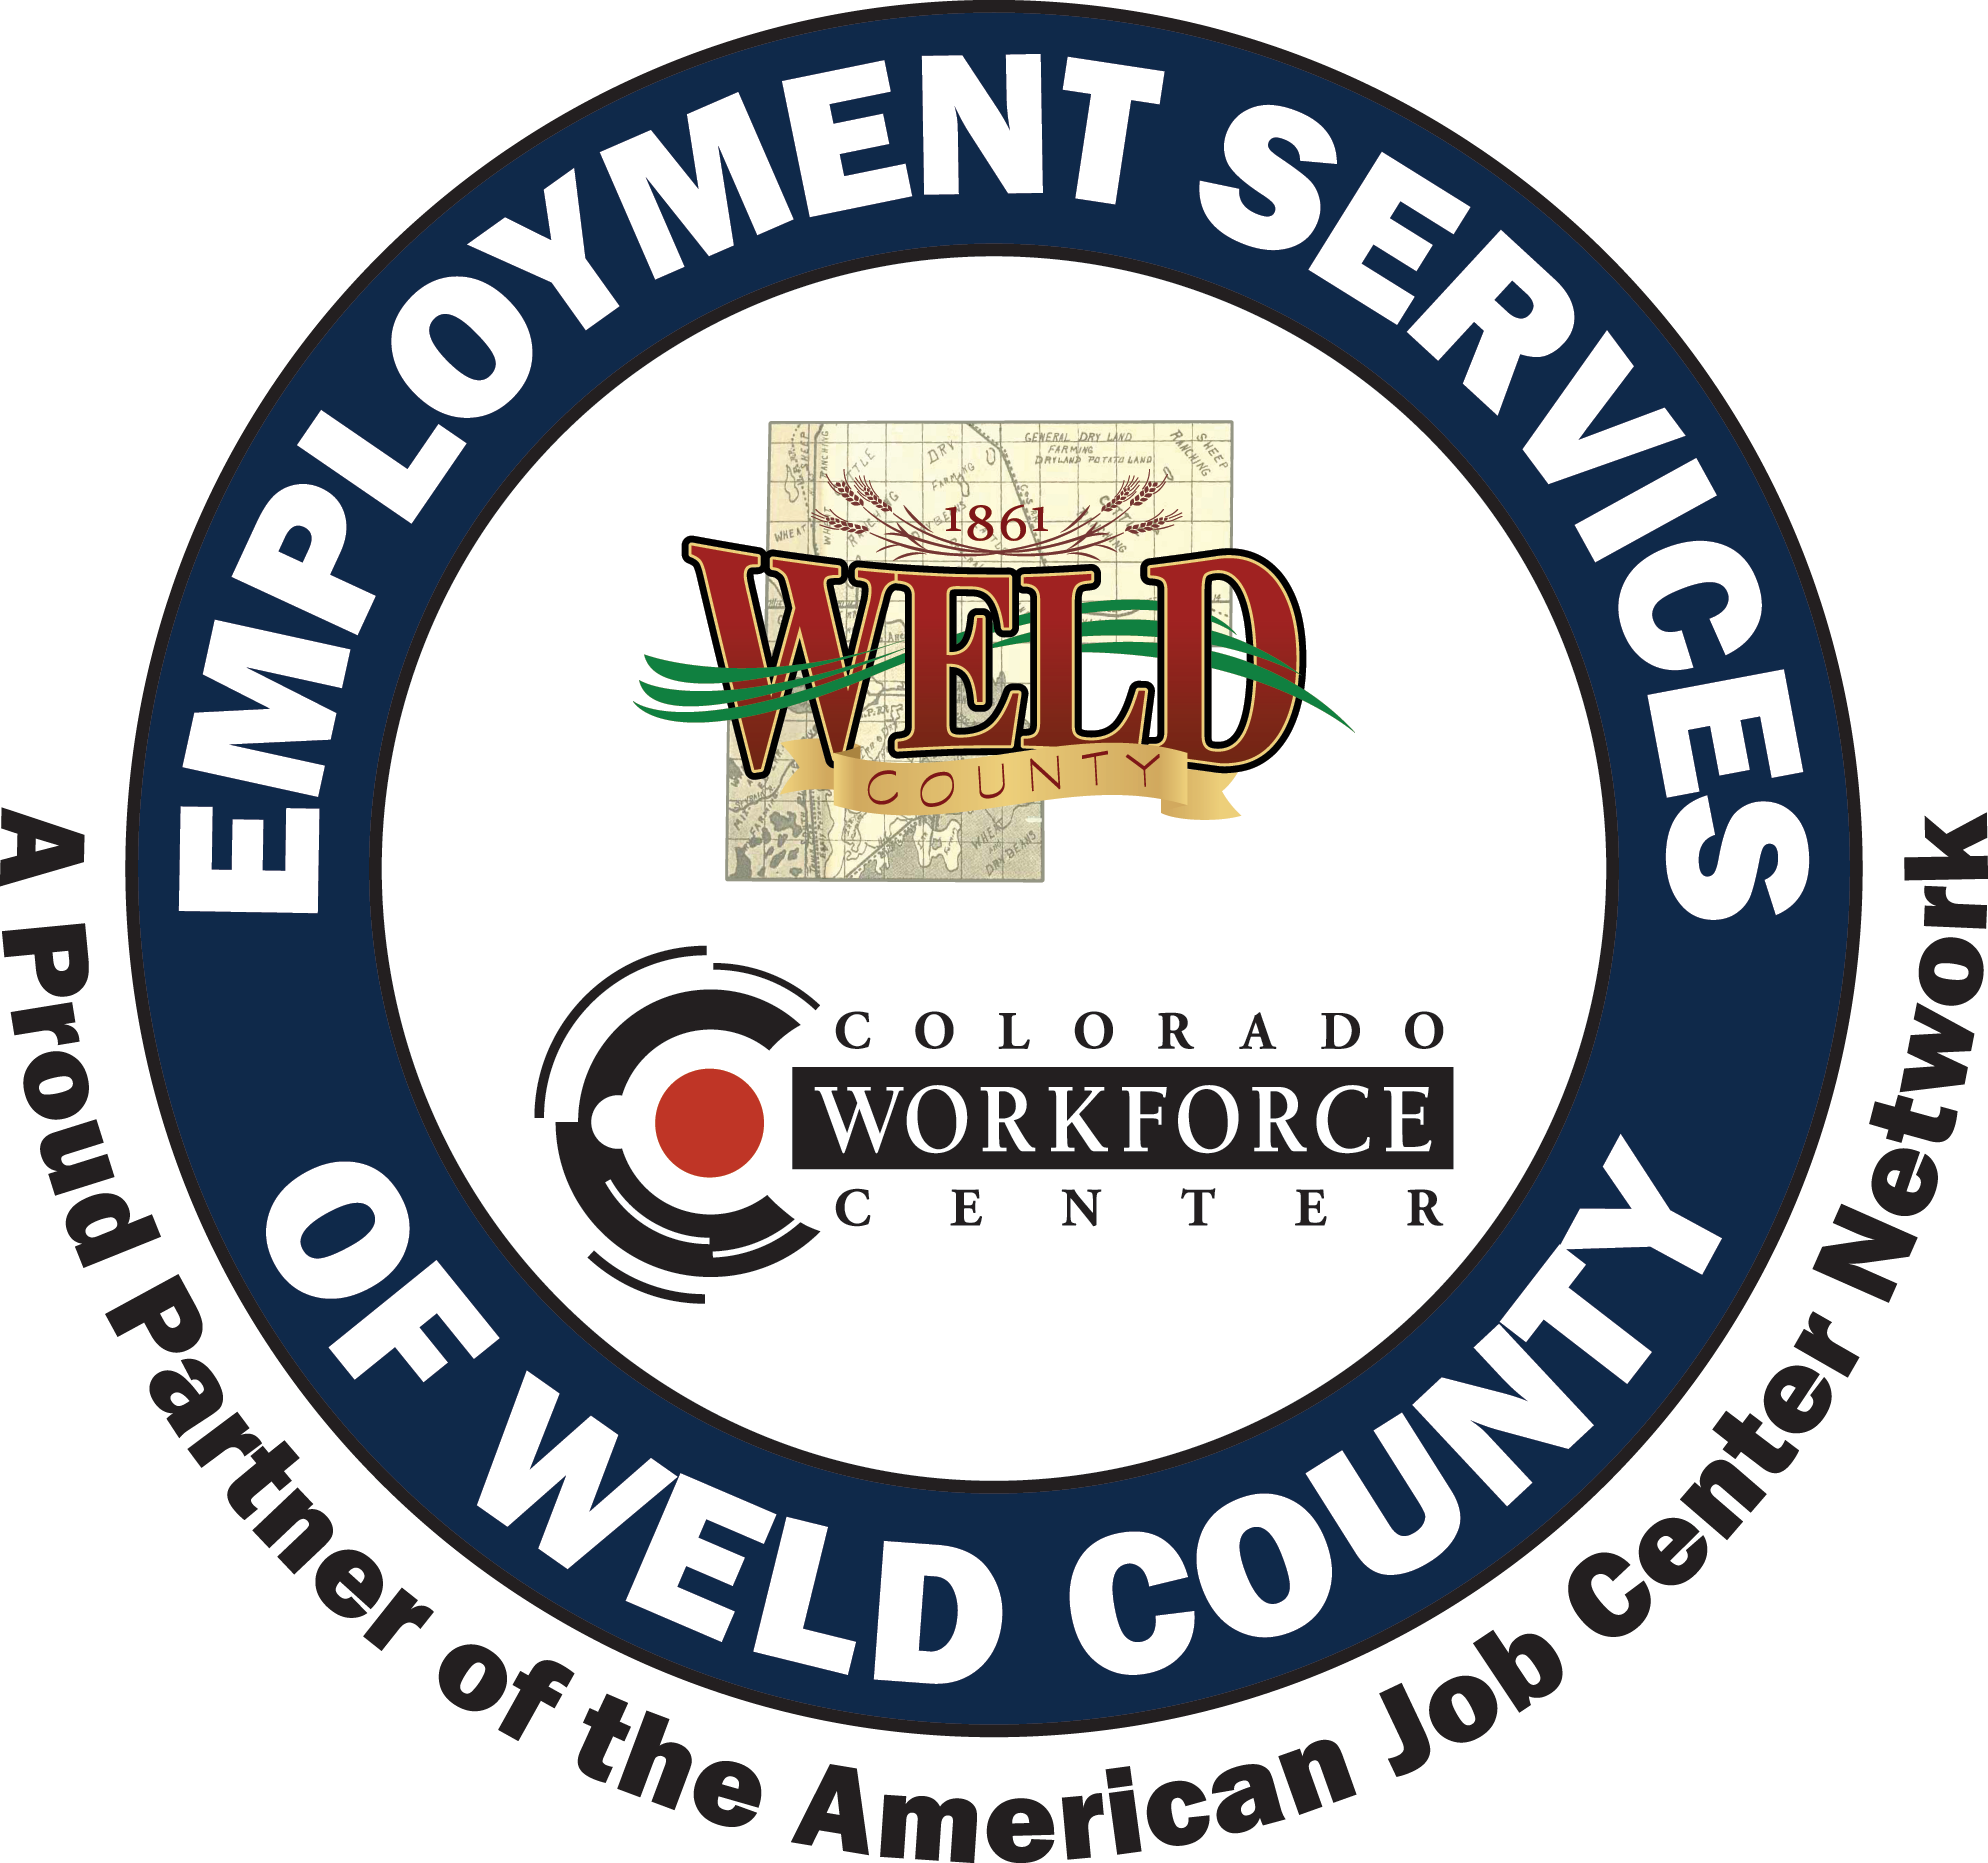 Employment Services of Weld County Logo. A proud partner of the American Job Center Network.